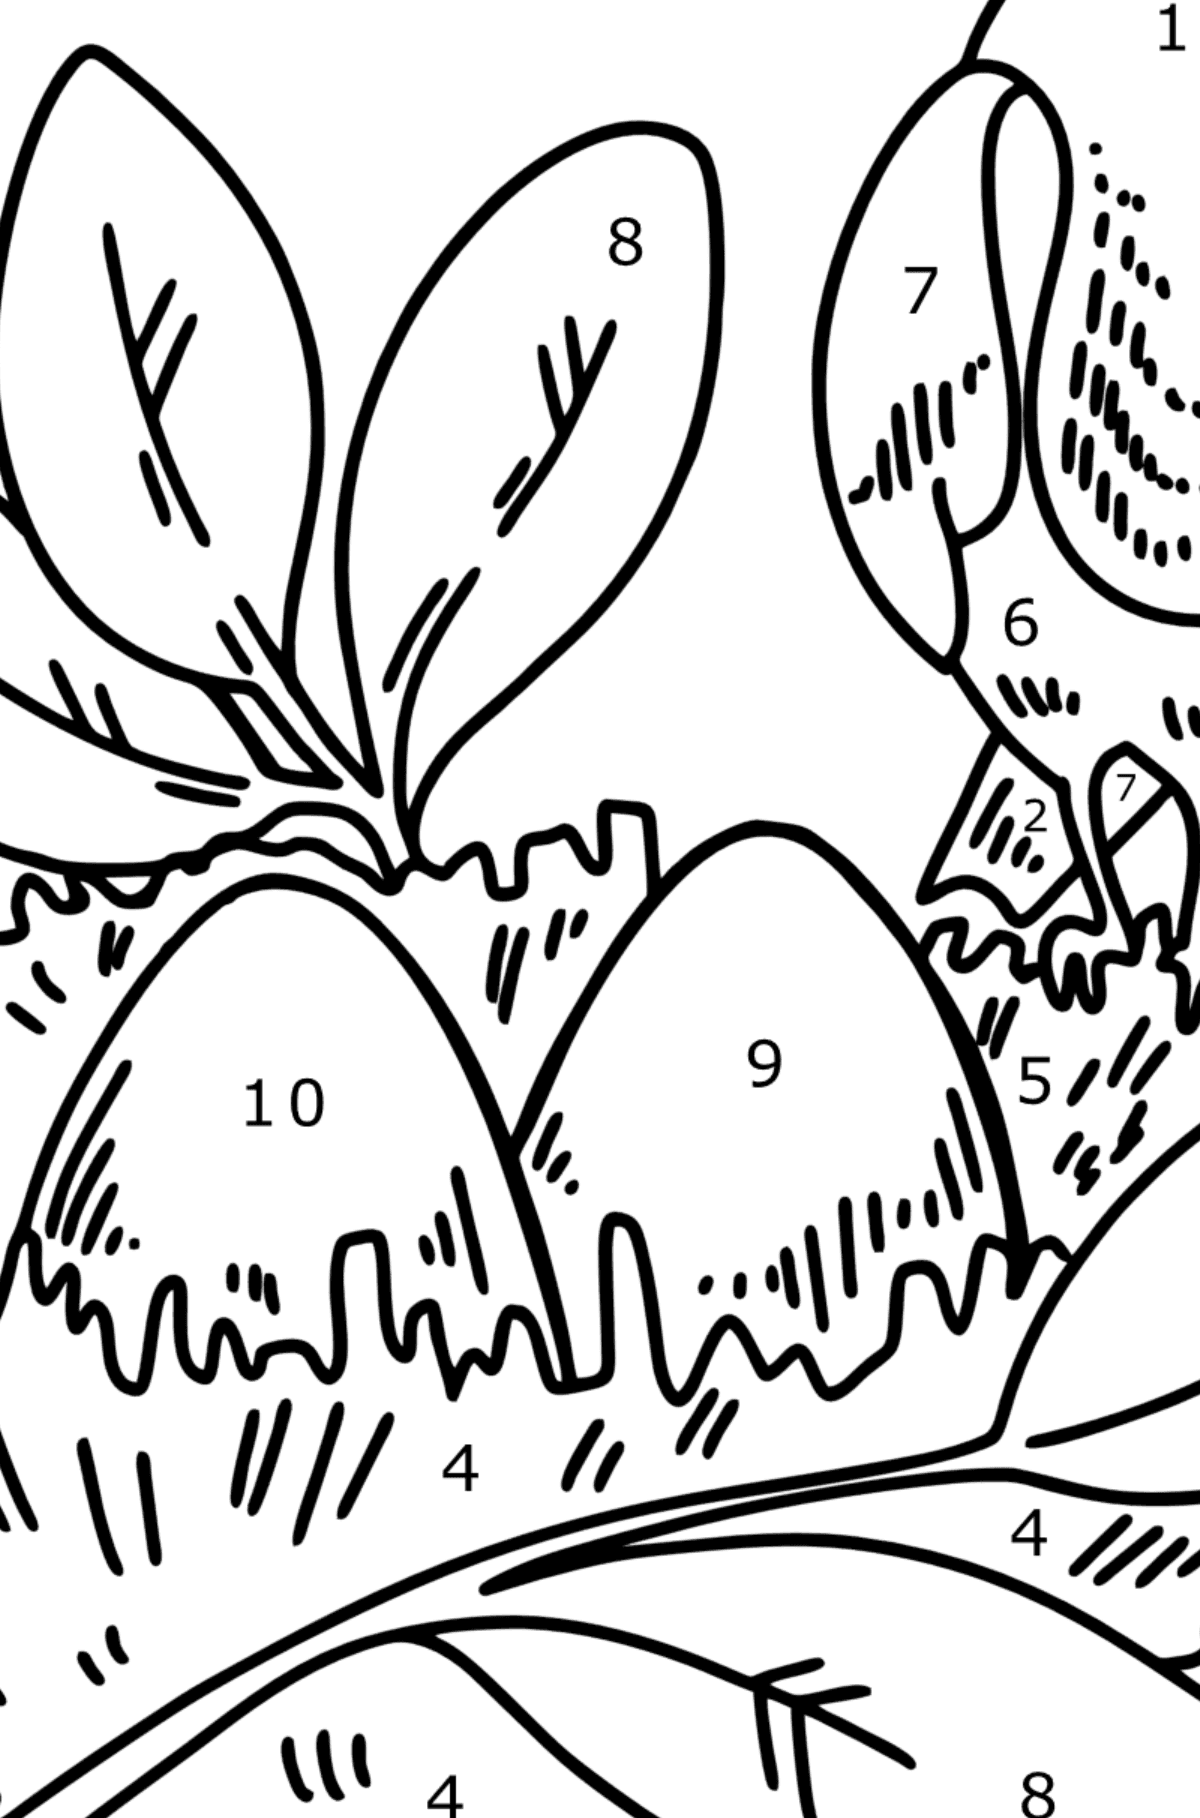 Coloring page - Thrush Nest - Coloring by Numbers for Kids